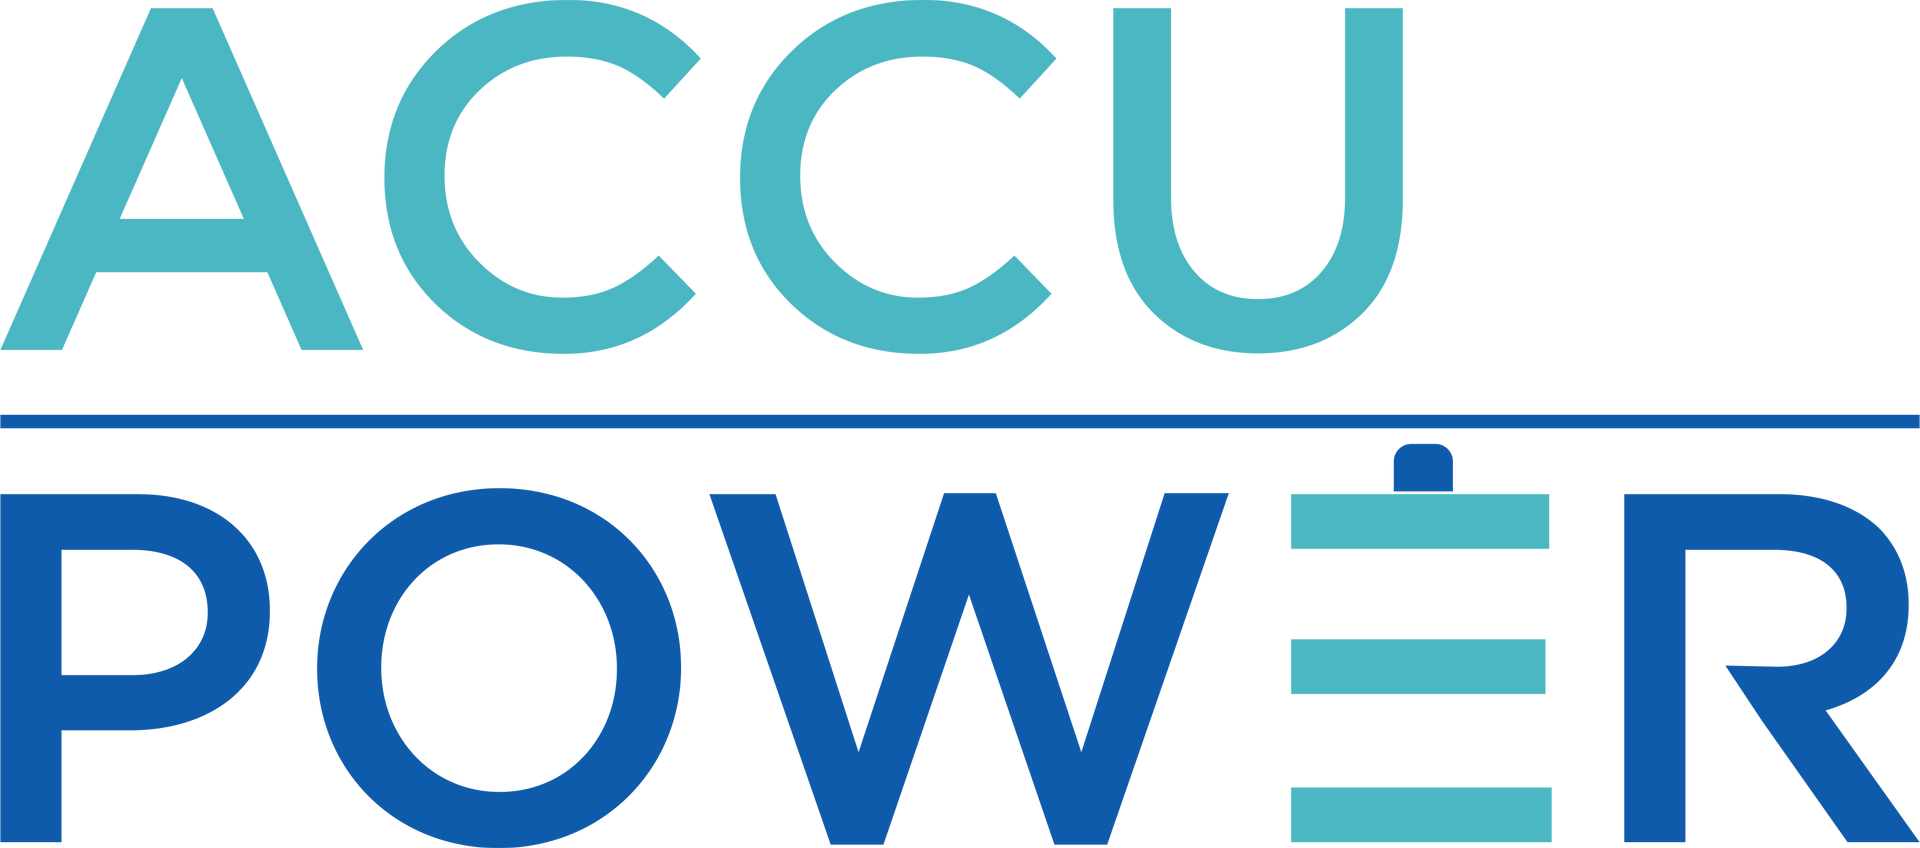 AccuPower